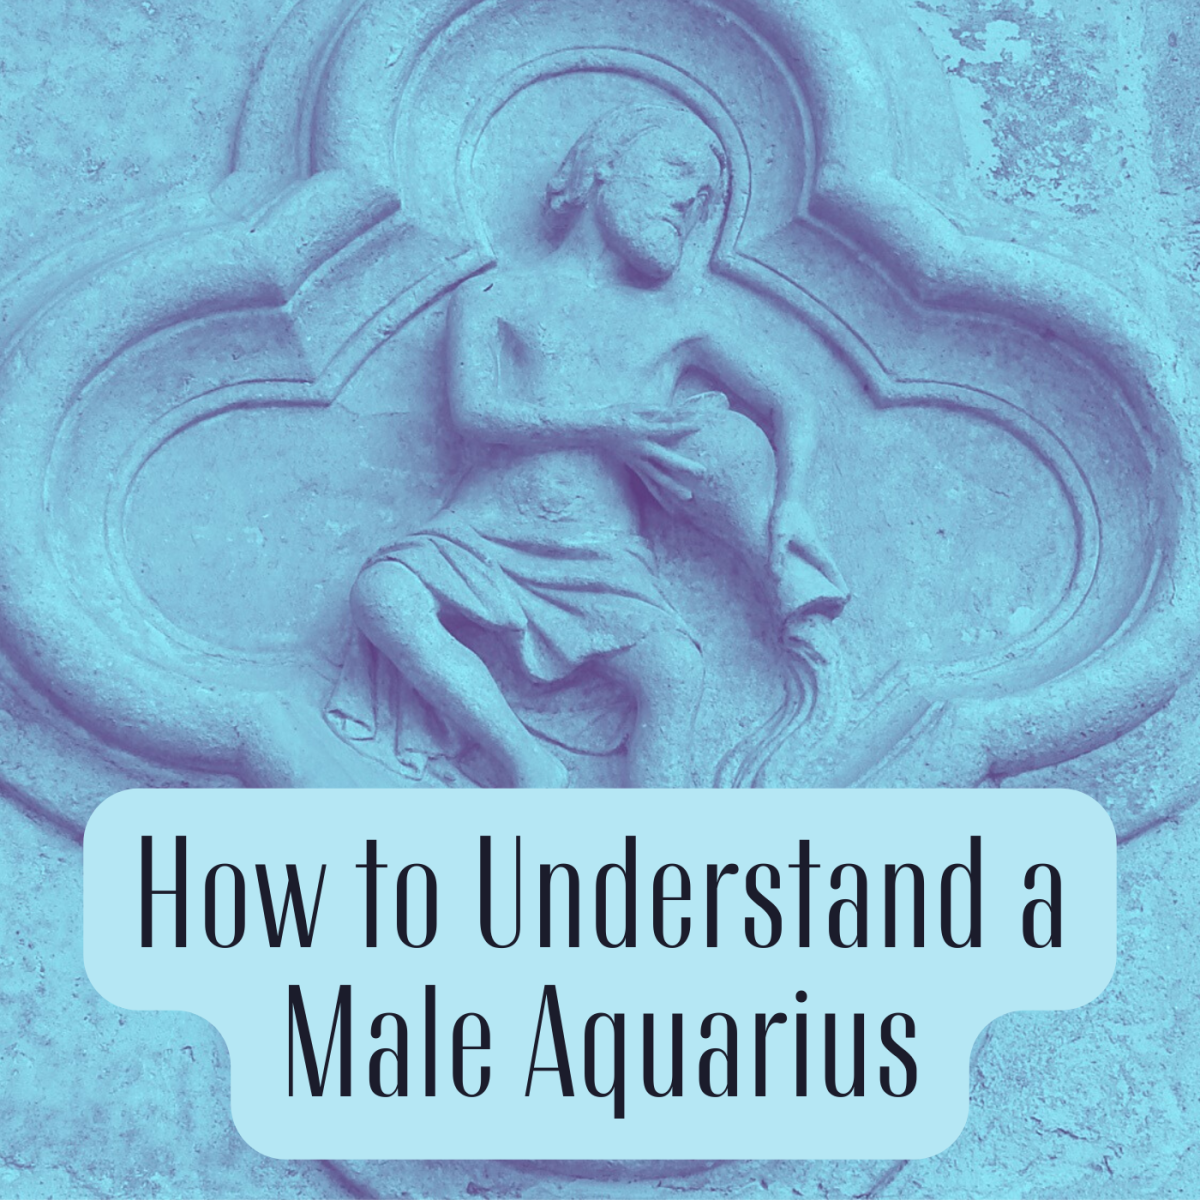 Learn about the characteristics of an Aquarius man.